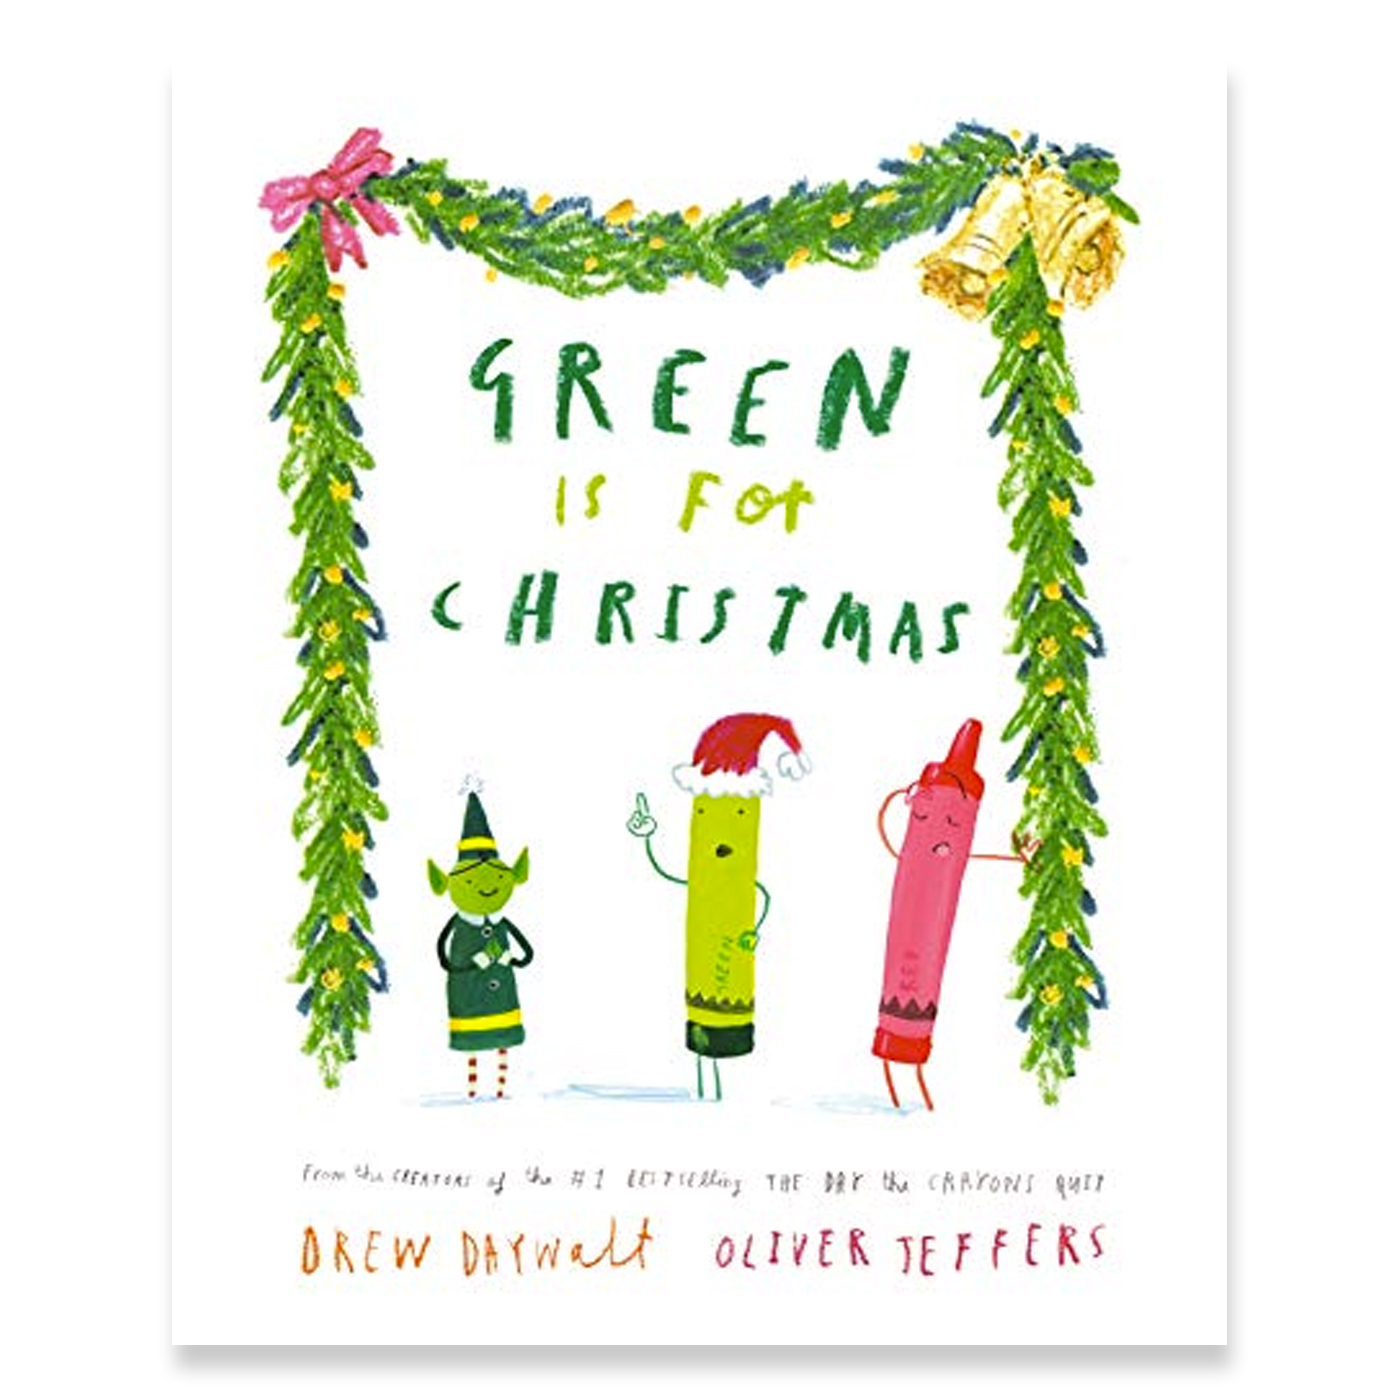 HARPER COLLINS Green is for Christmas